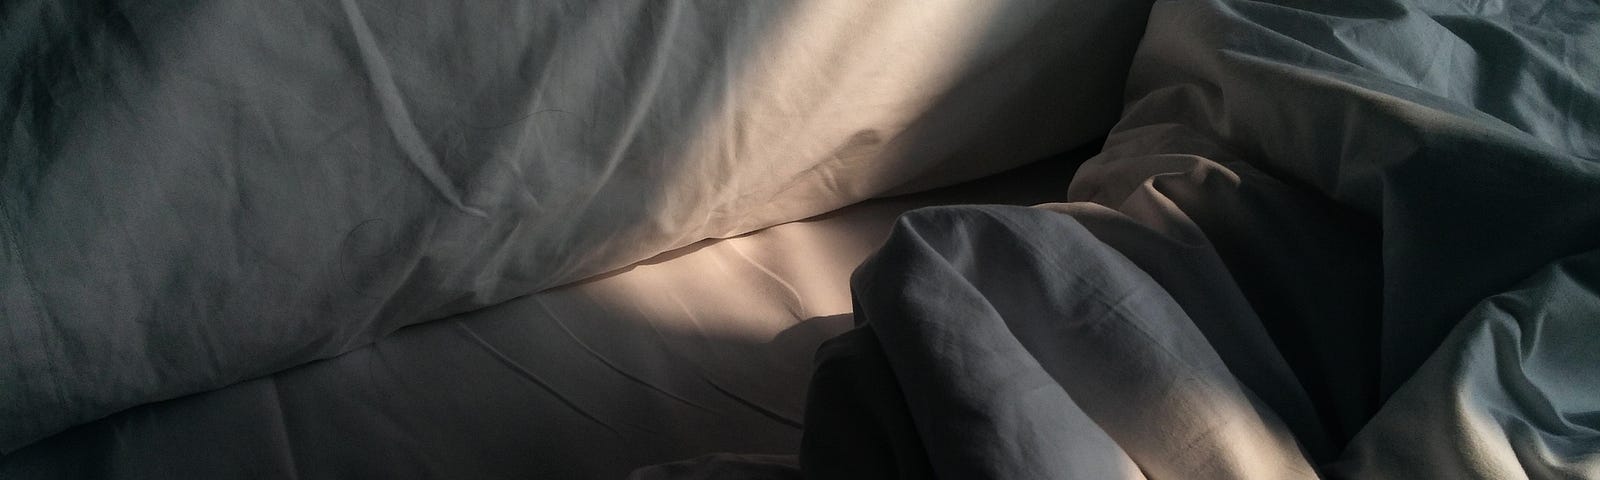 A photo of an empty bed. White pillows, bedsheets. A strand of light adds some warmth to the center.